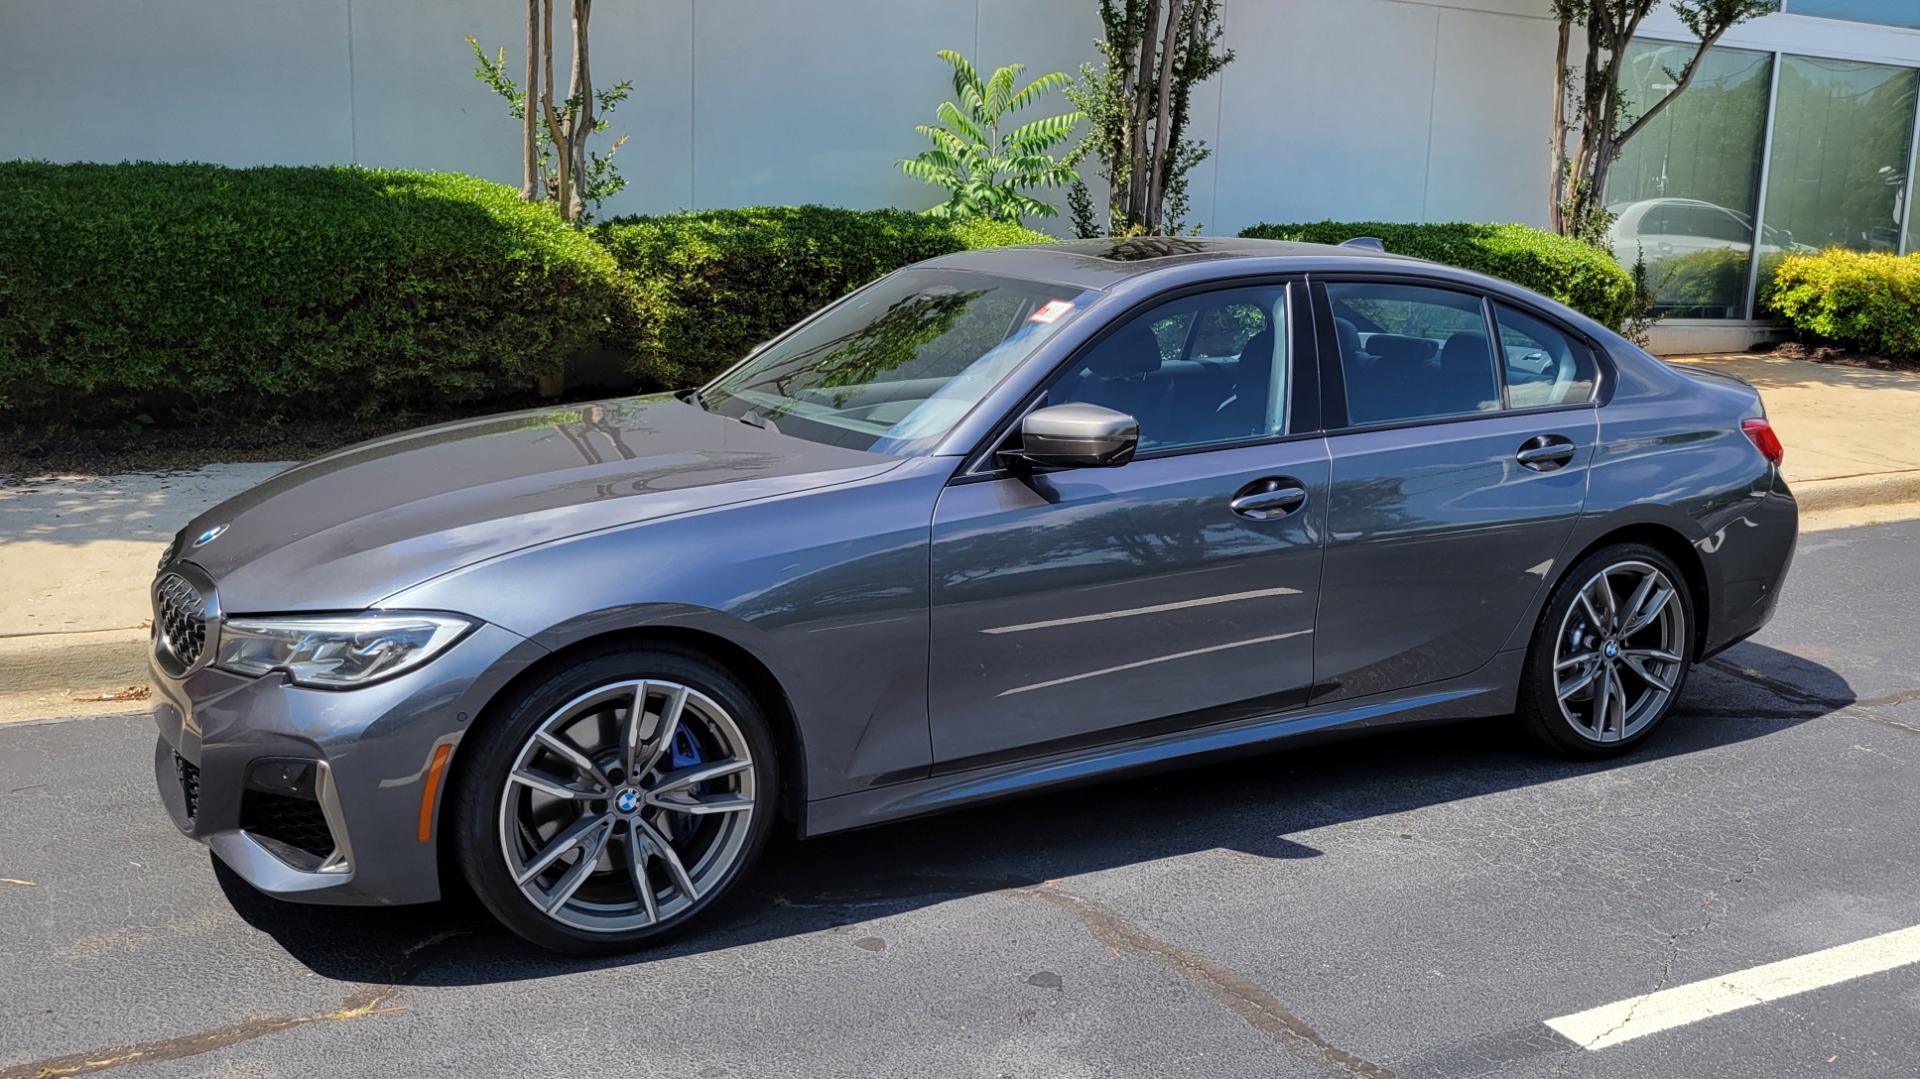 Used 2020 BMW 3 SERIES M340I XDRIVE / PREMIUM / DRVR ASST / H/K SND / REARVIEW for sale $49,595 at Formula Imports in Charlotte NC 28227 1